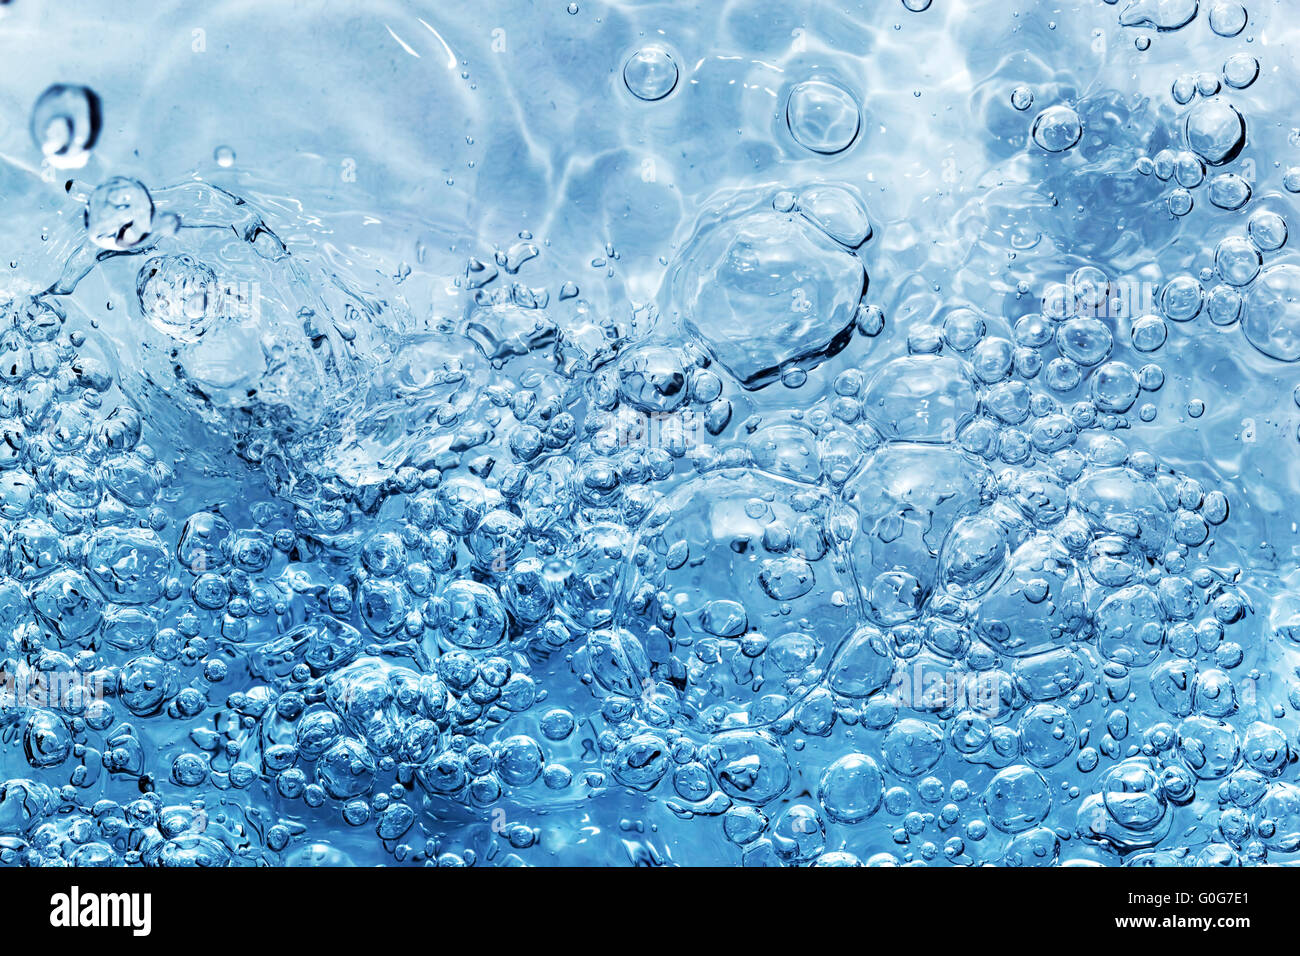 Clean fresh water with bubbles appearing when pouring water or a splash. Natural background Stock Photo